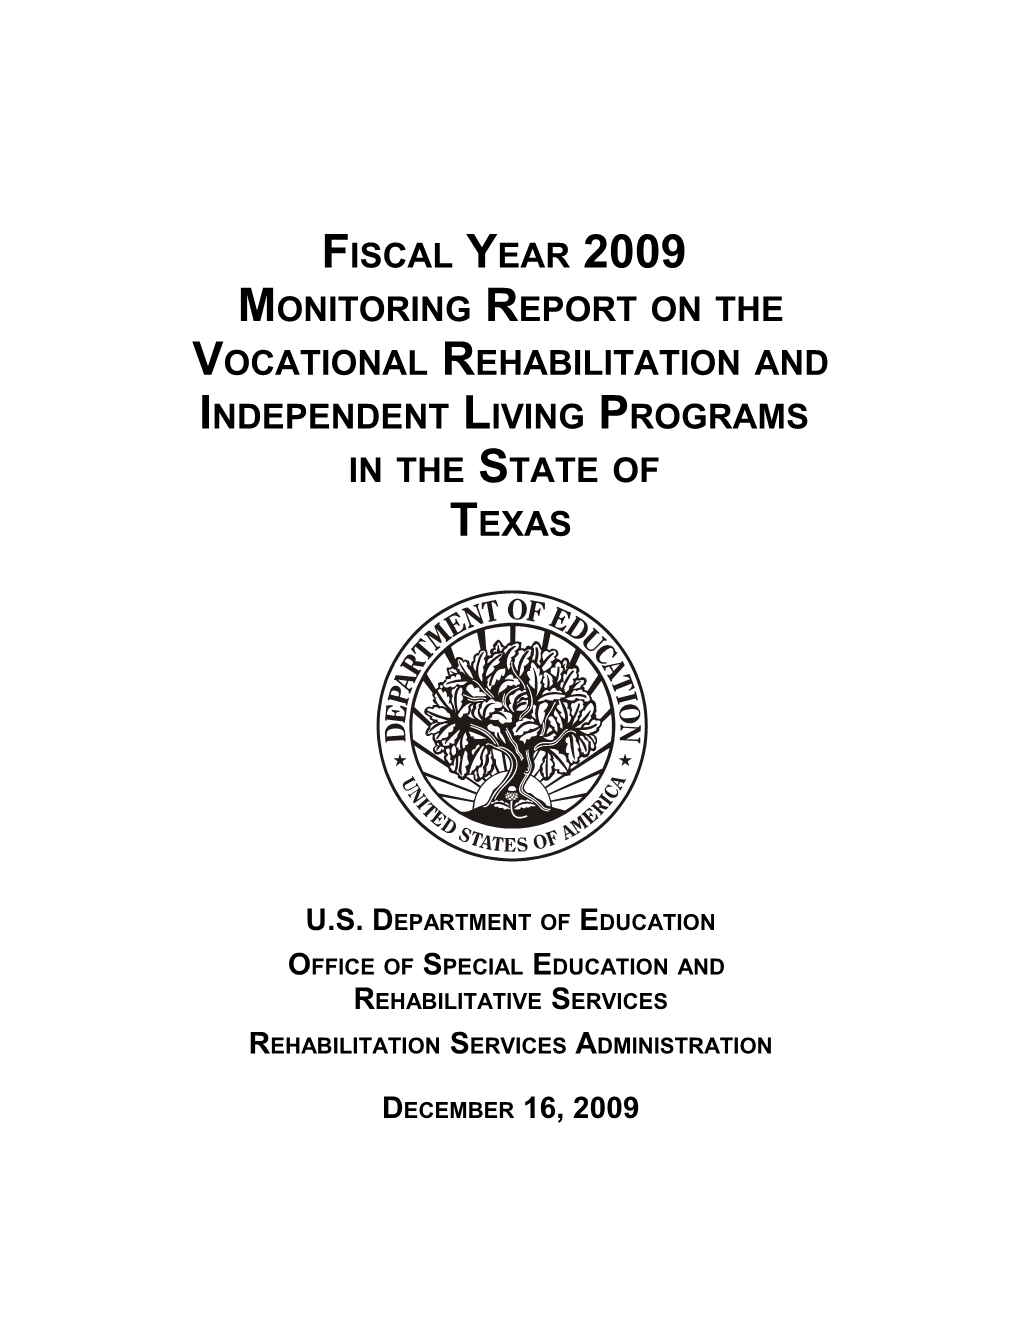 Fiscal Year 2009 Monitoring Report on the Vocational Rehabilitation and Independent Living